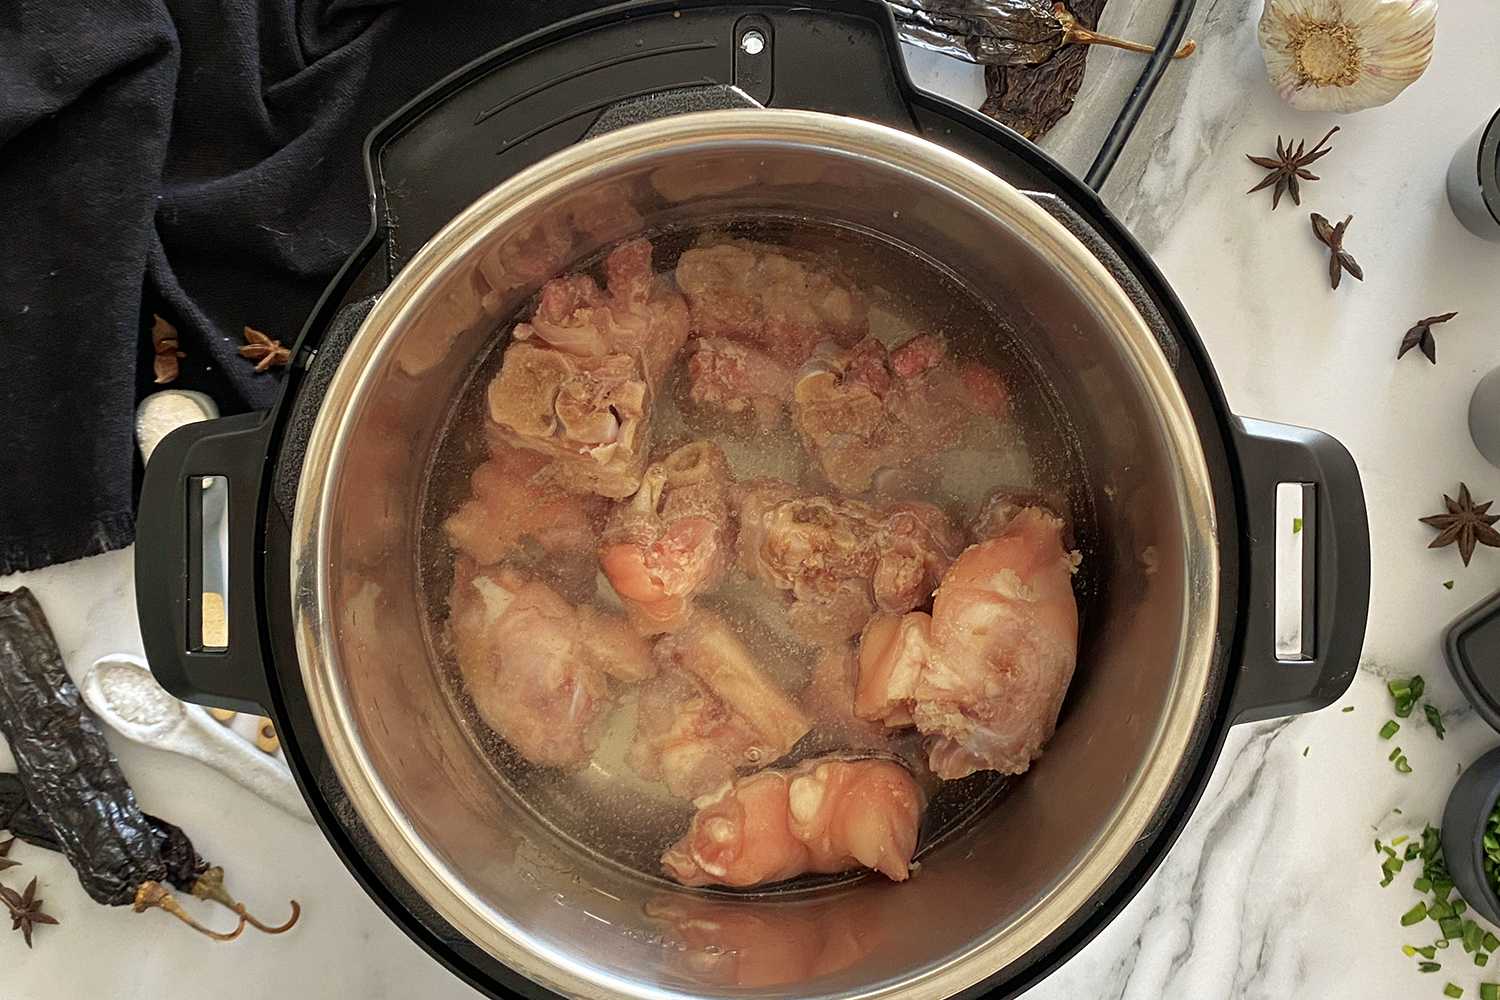 How Long To Make Pig Feet In An Electric Pressure Cooker